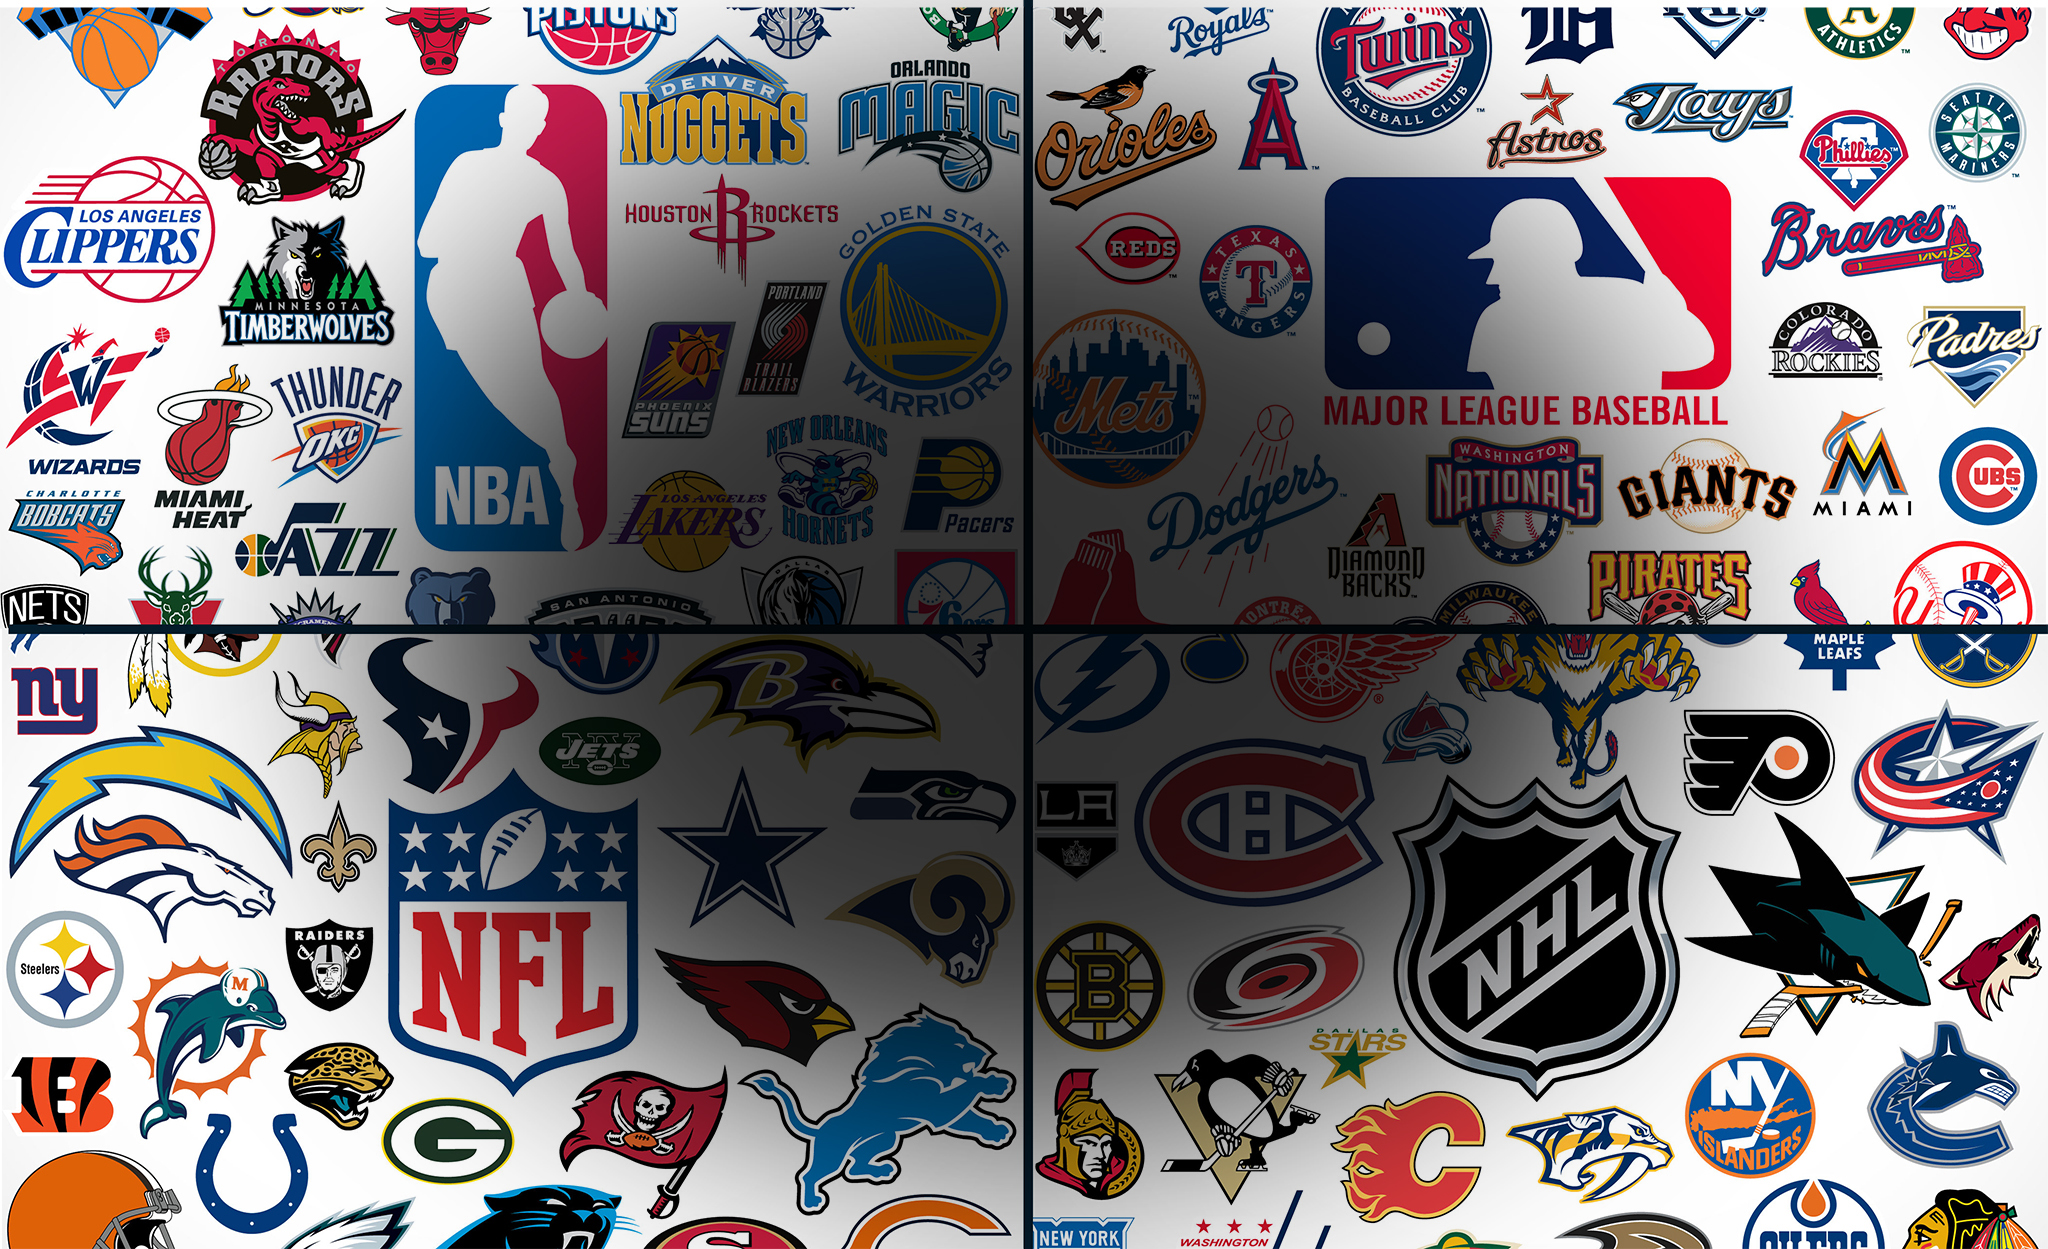 The Best Sports Logo Designs in History